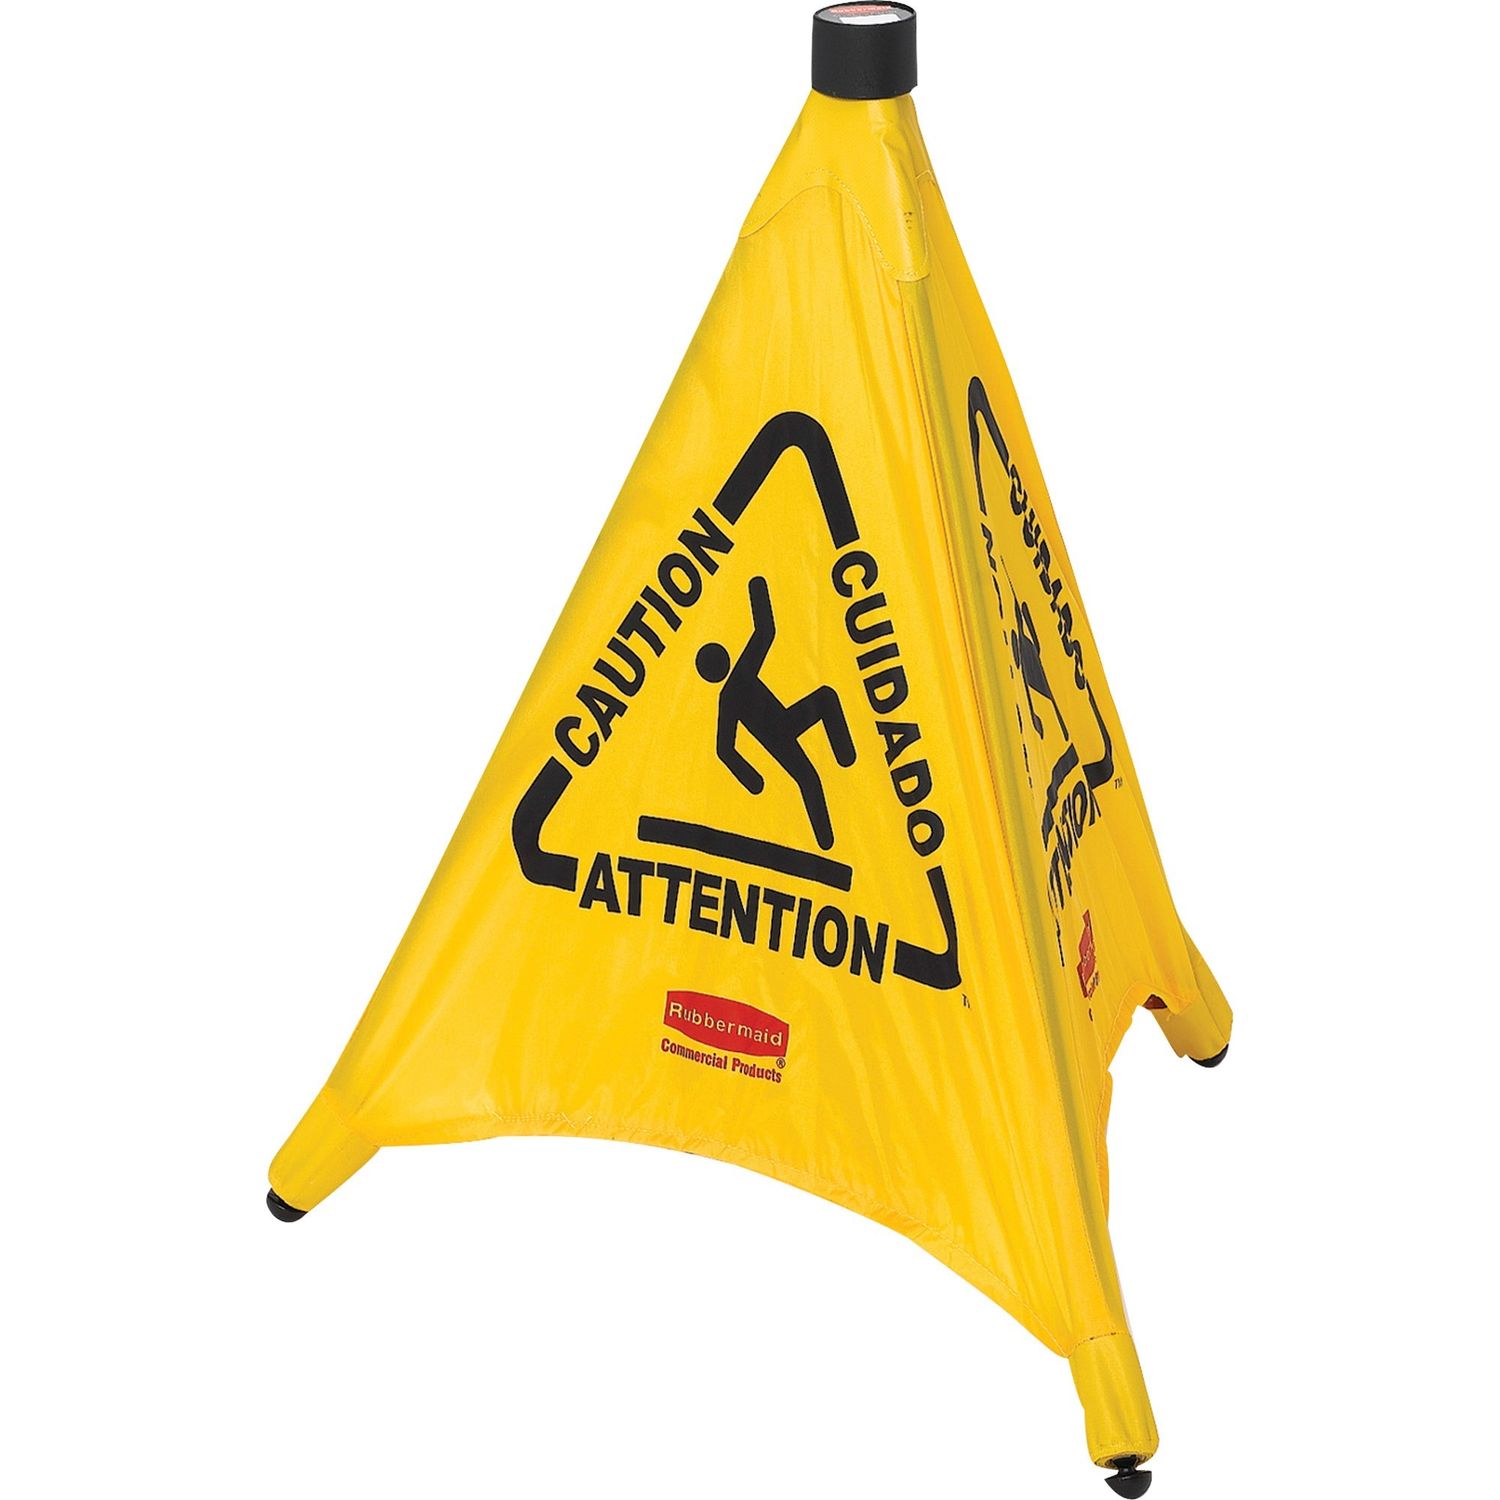 Multi-Lingual Caution Safety Cone 1 Each, Caution, Attention, Cuidado Print/Message, 21" Width x 20" Height, Durable, Multilingual, Yellow